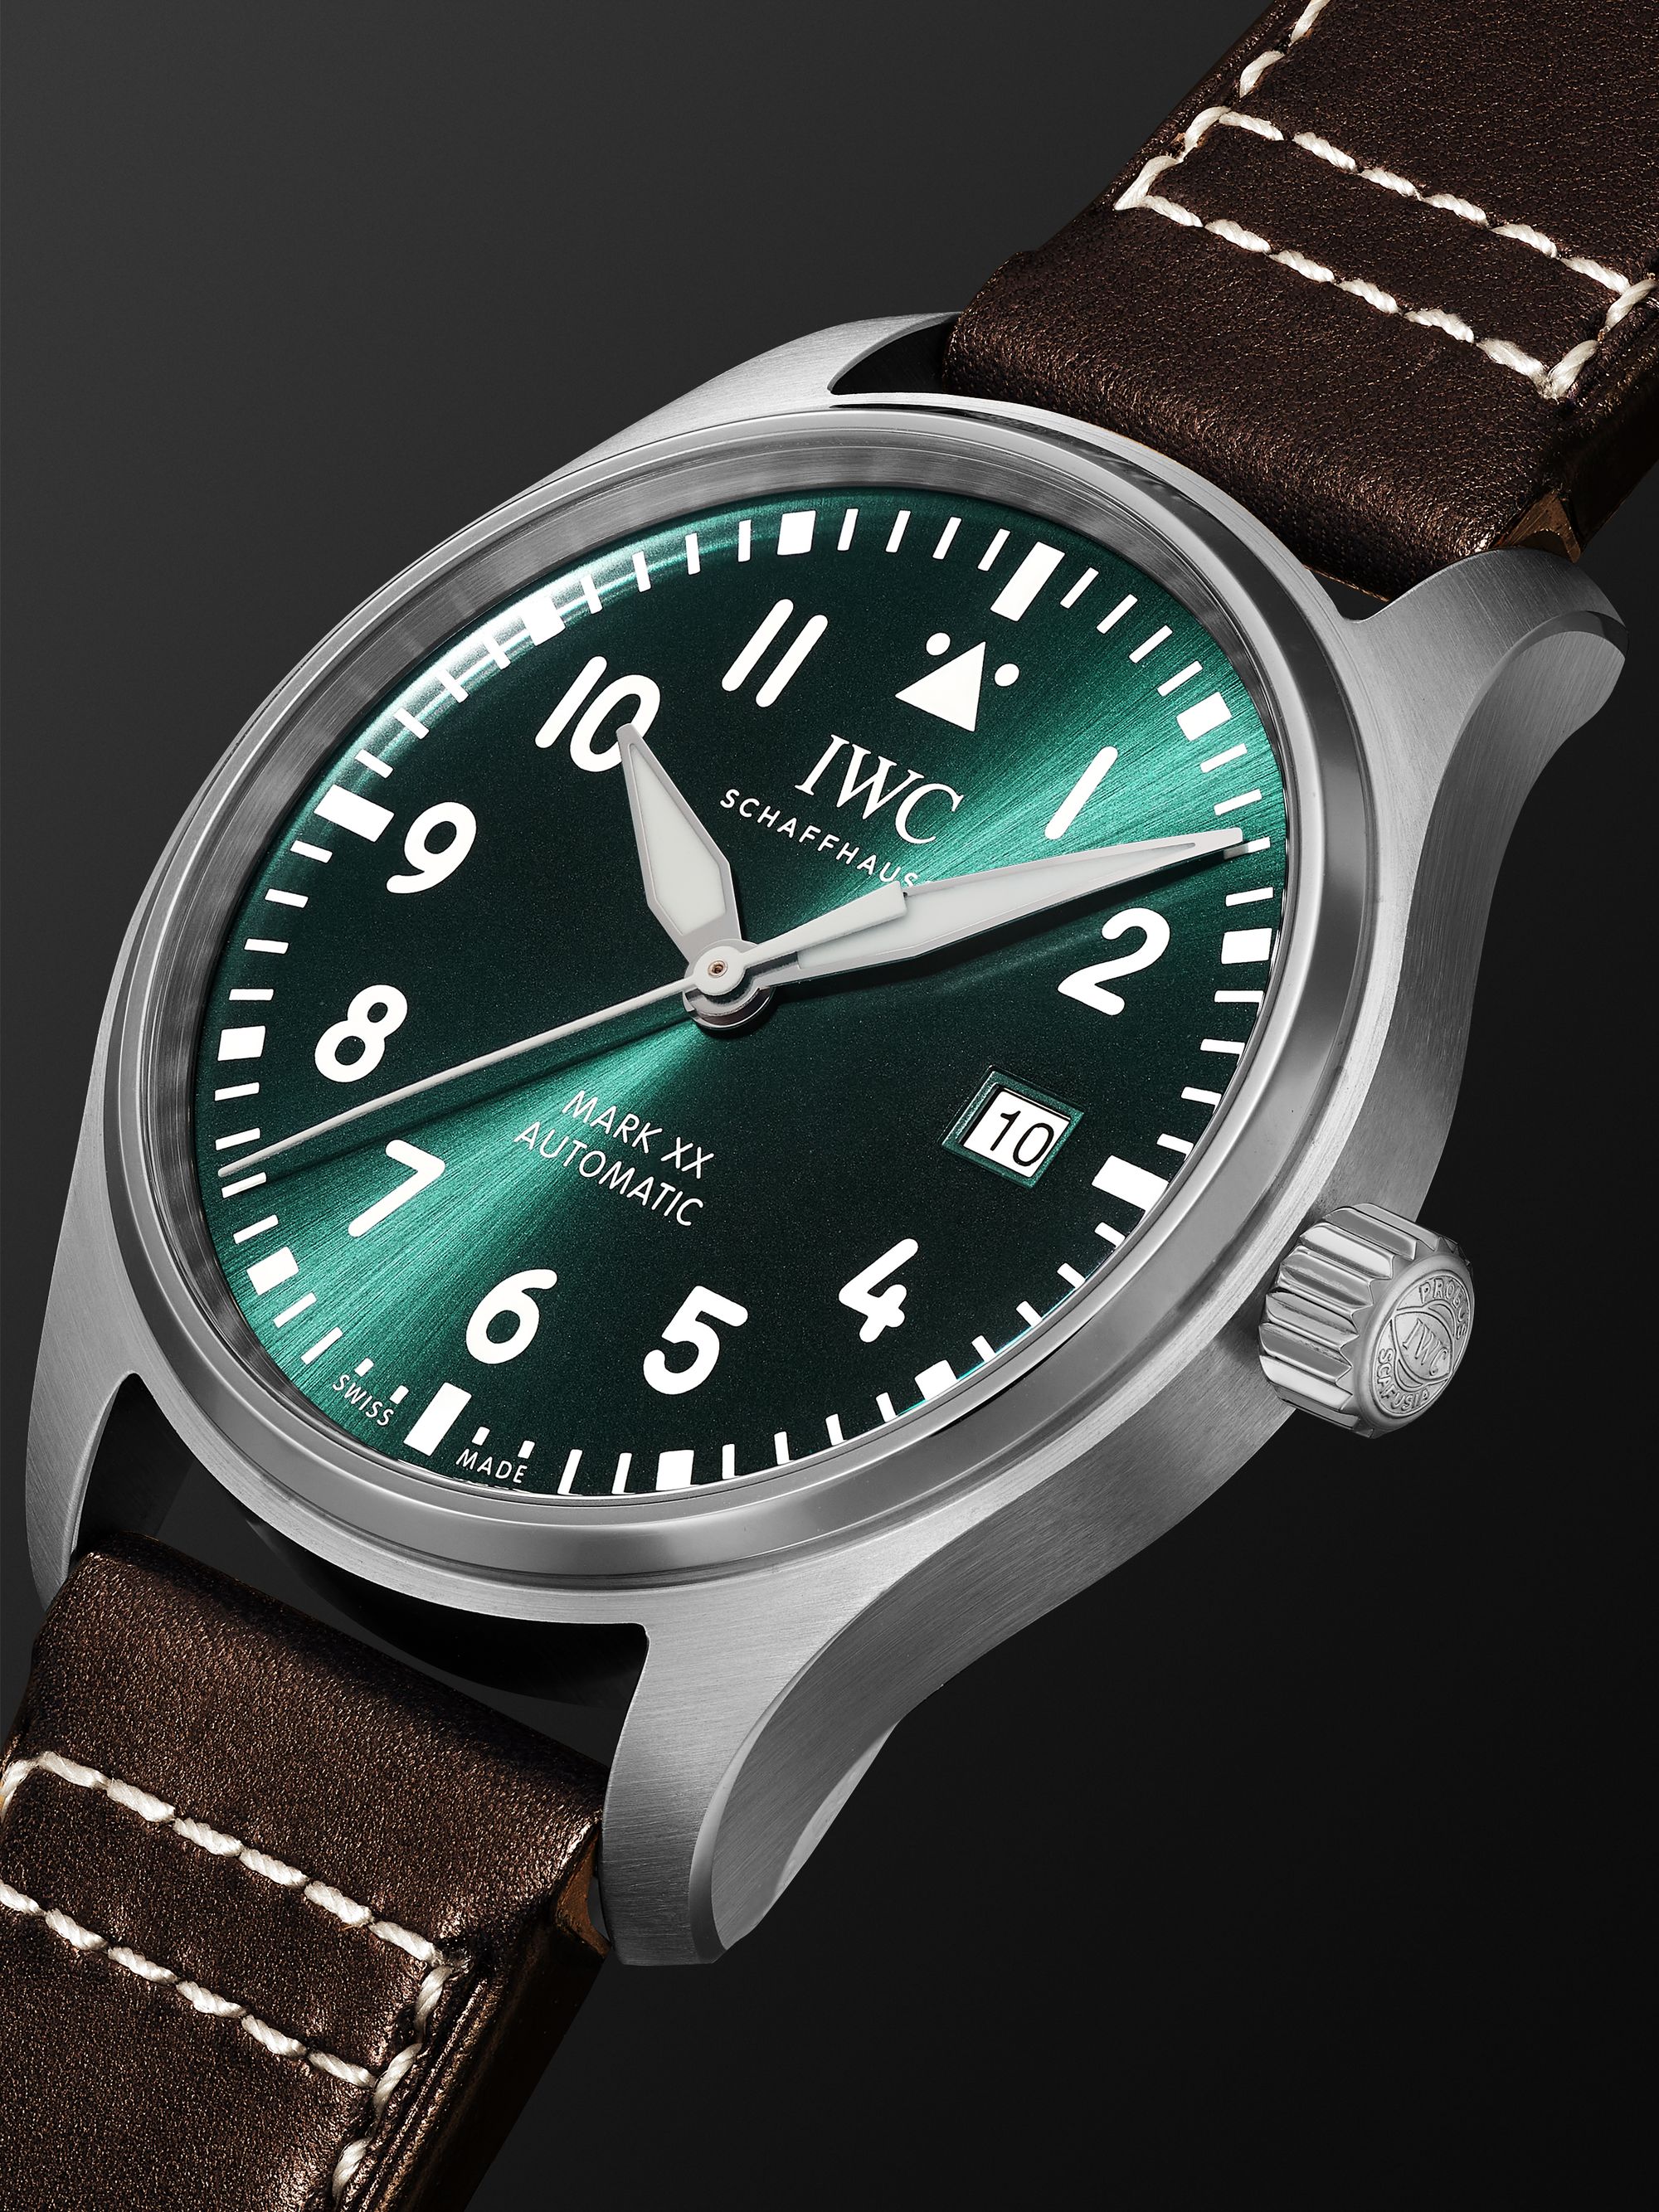 IWC SCHAFFHAUSEN Pilot's Mark XX Automatic 40mm Stainless Steel and Leather Watch, Ref. No. IW328201